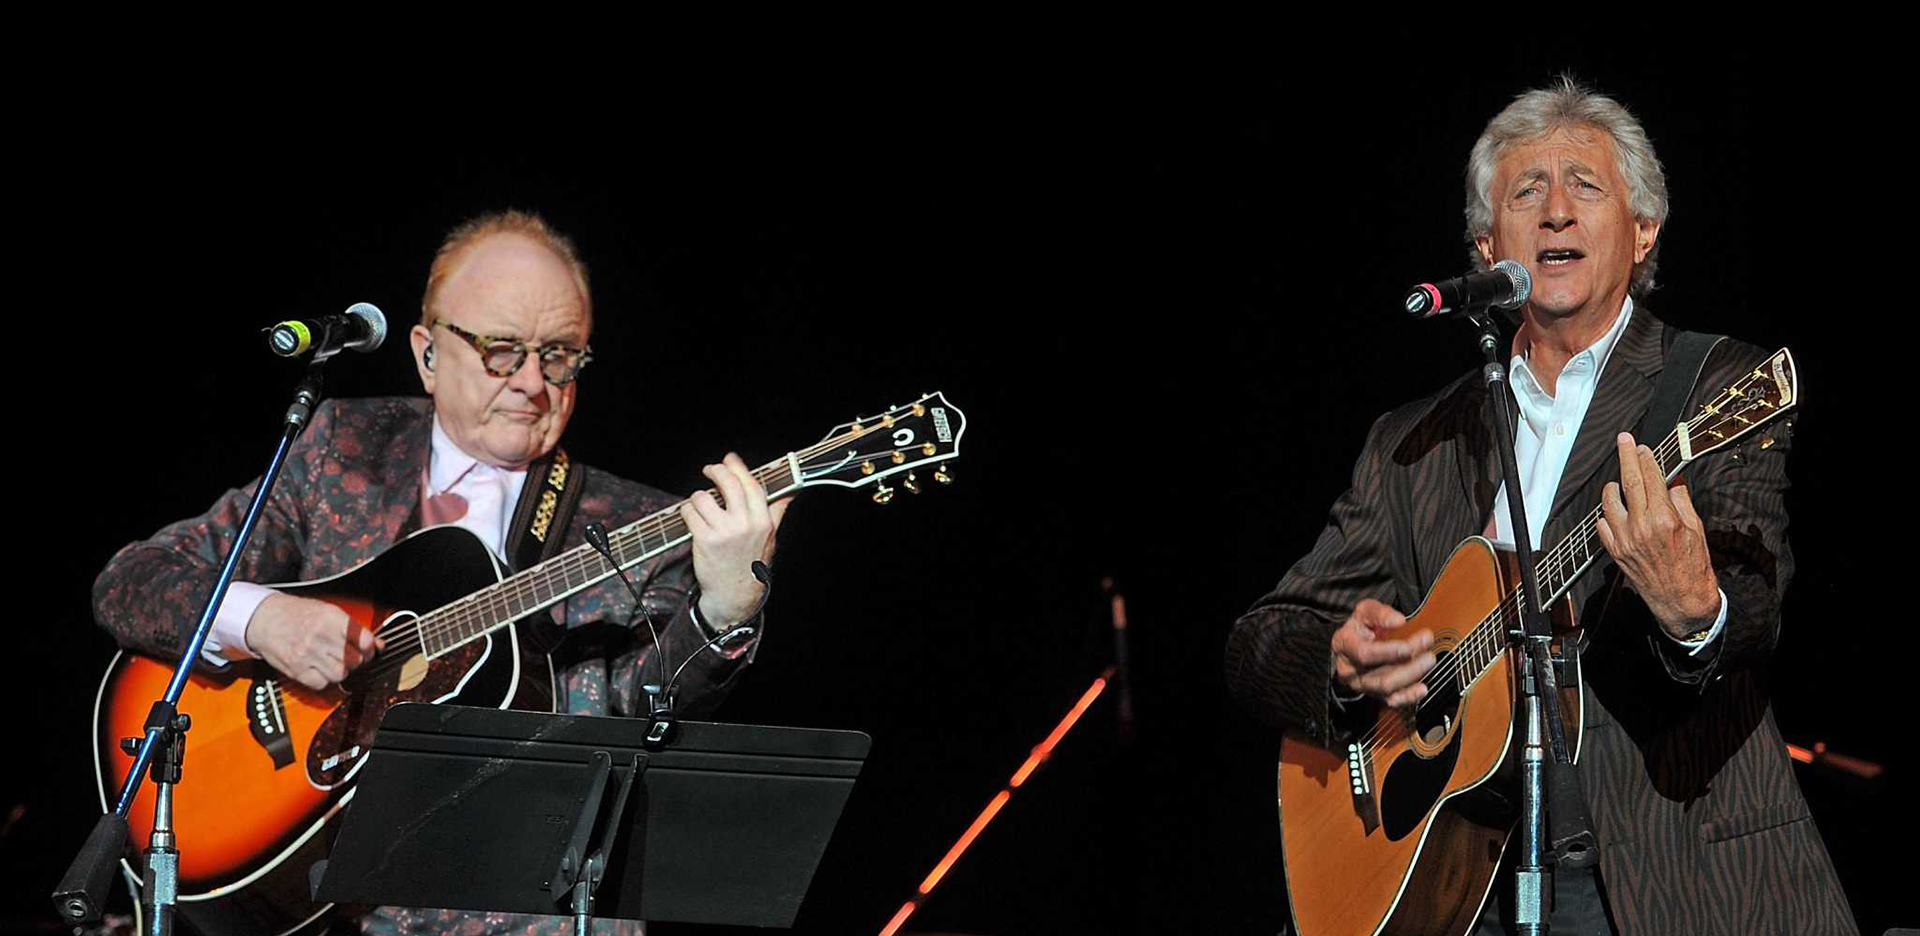 Peter Asher and Jeremy Clyde